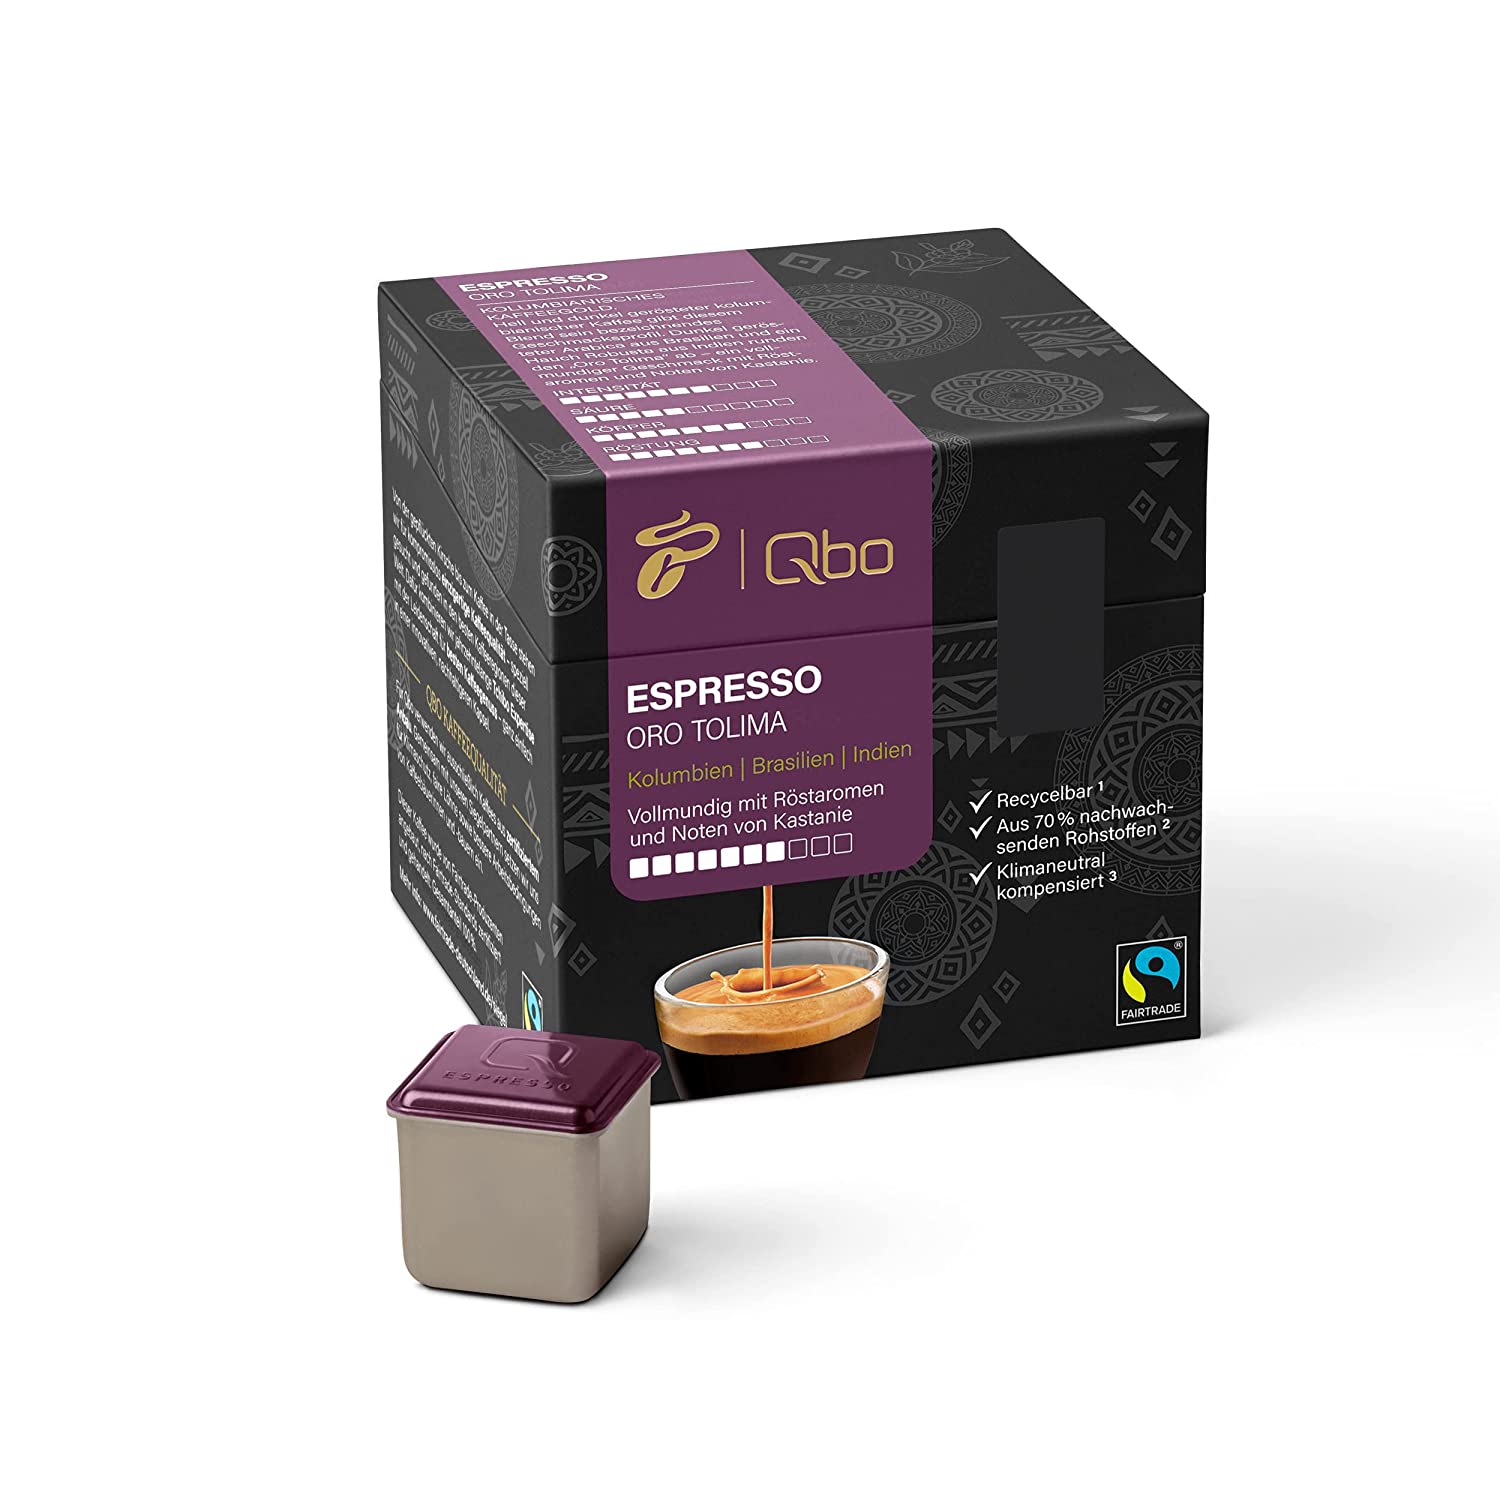 Tchibo qbo Espresso Oro Tolima Premium Coffee capsules, 27 pieces (espresso, intensity 7/10, full -bodied with roasted aromas), sustainable, from 70% renewable raw materials & climate -neutral